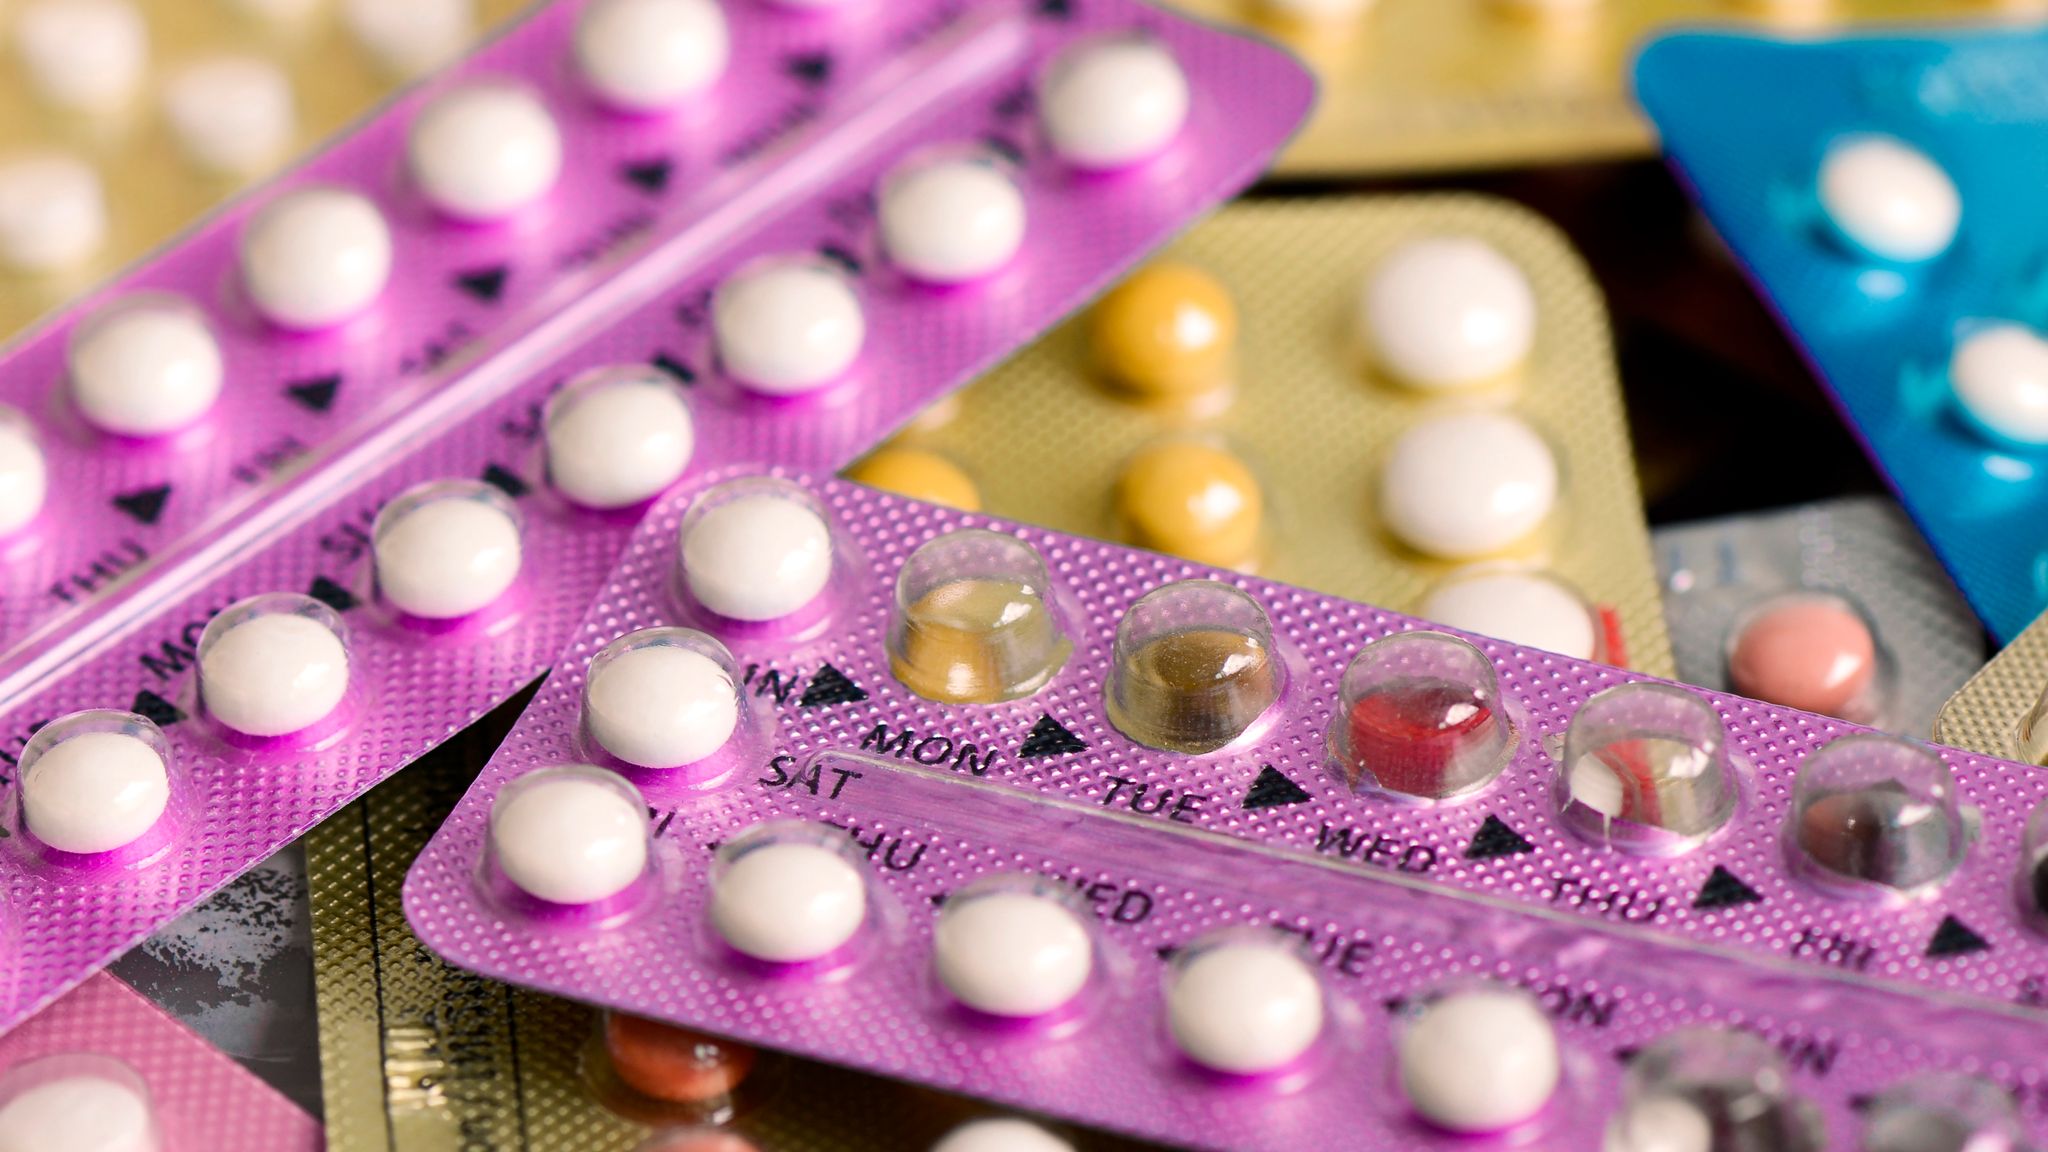 Using any type of hormonal contraceptive could increase the risk of women getting breast cancer, new study suggests | Science & Tech News | Sky News